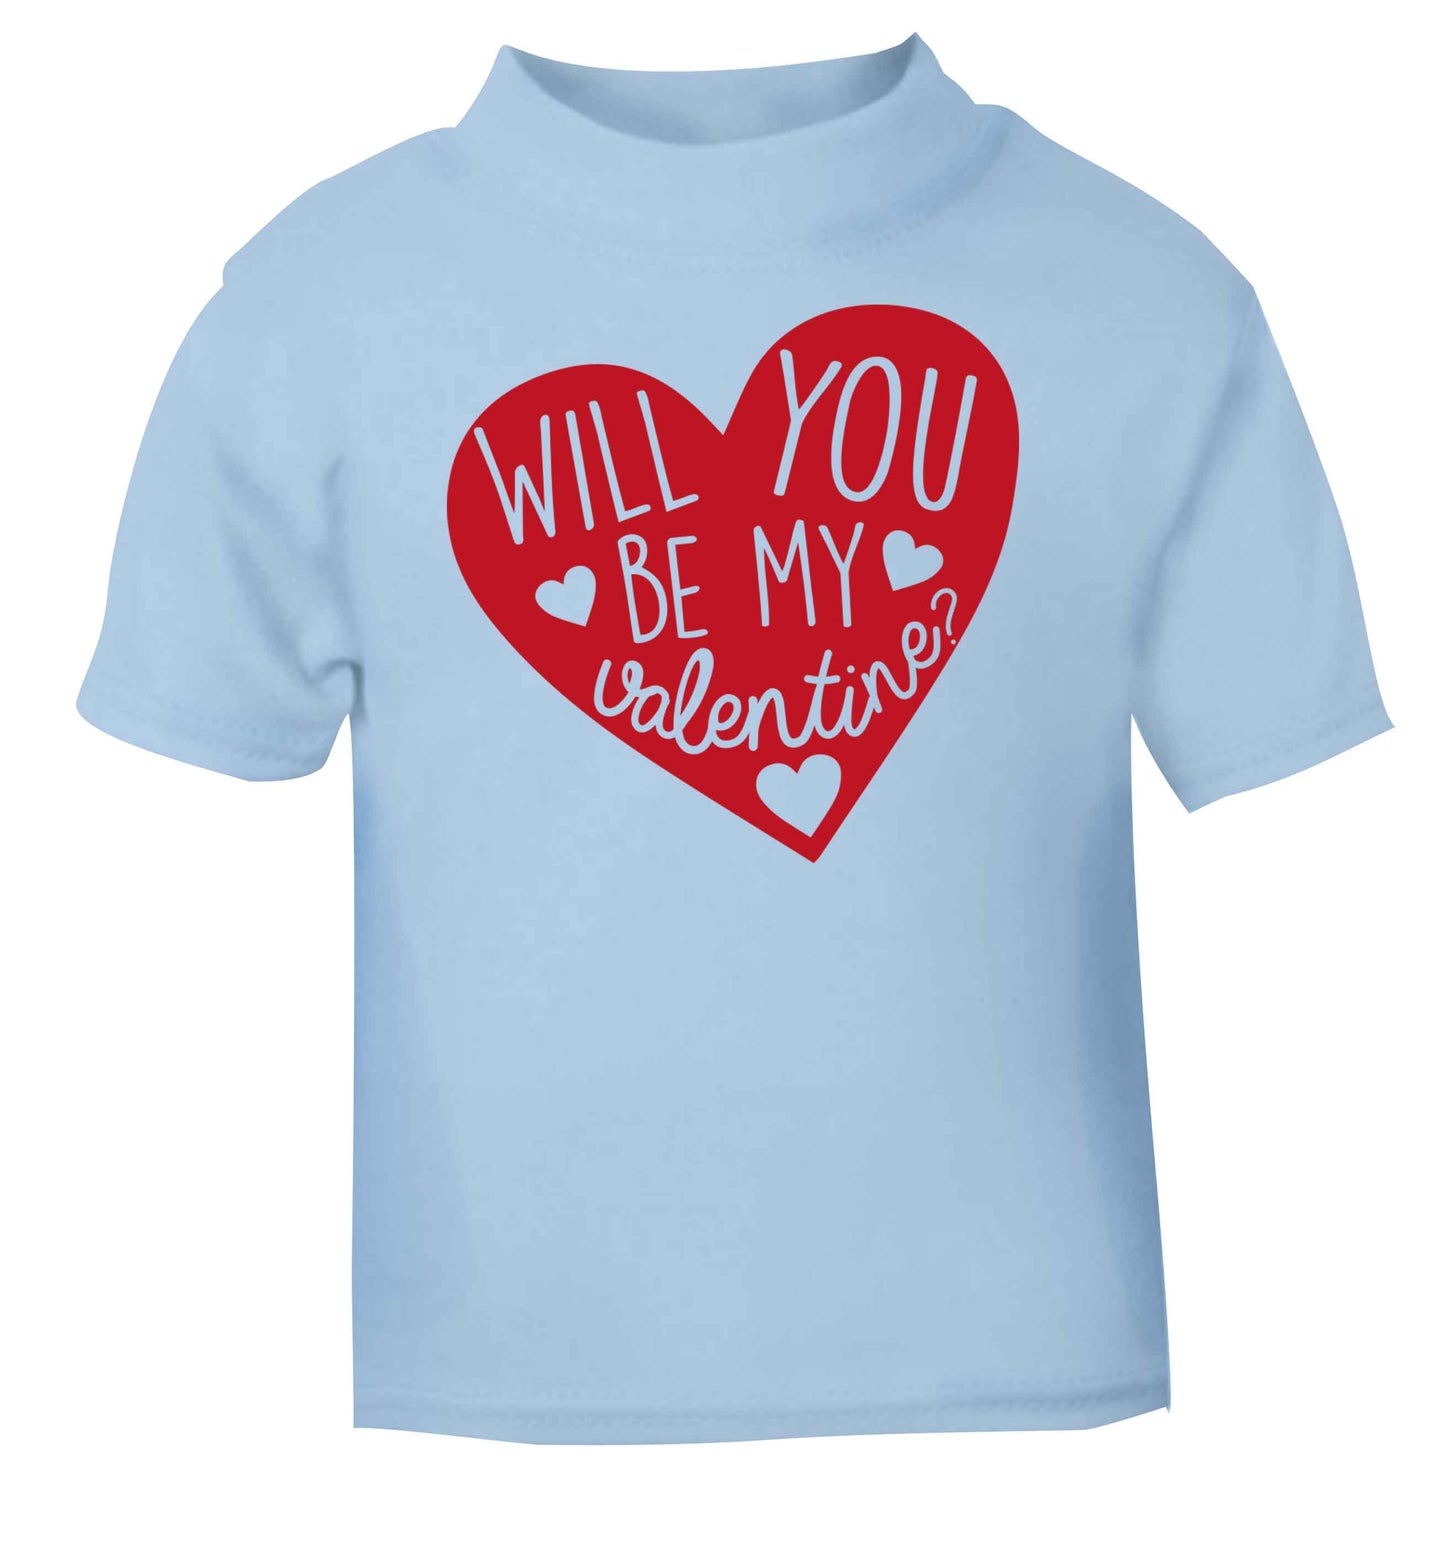 Will you be my valentine? light blue baby toddler Tshirt 2 Years